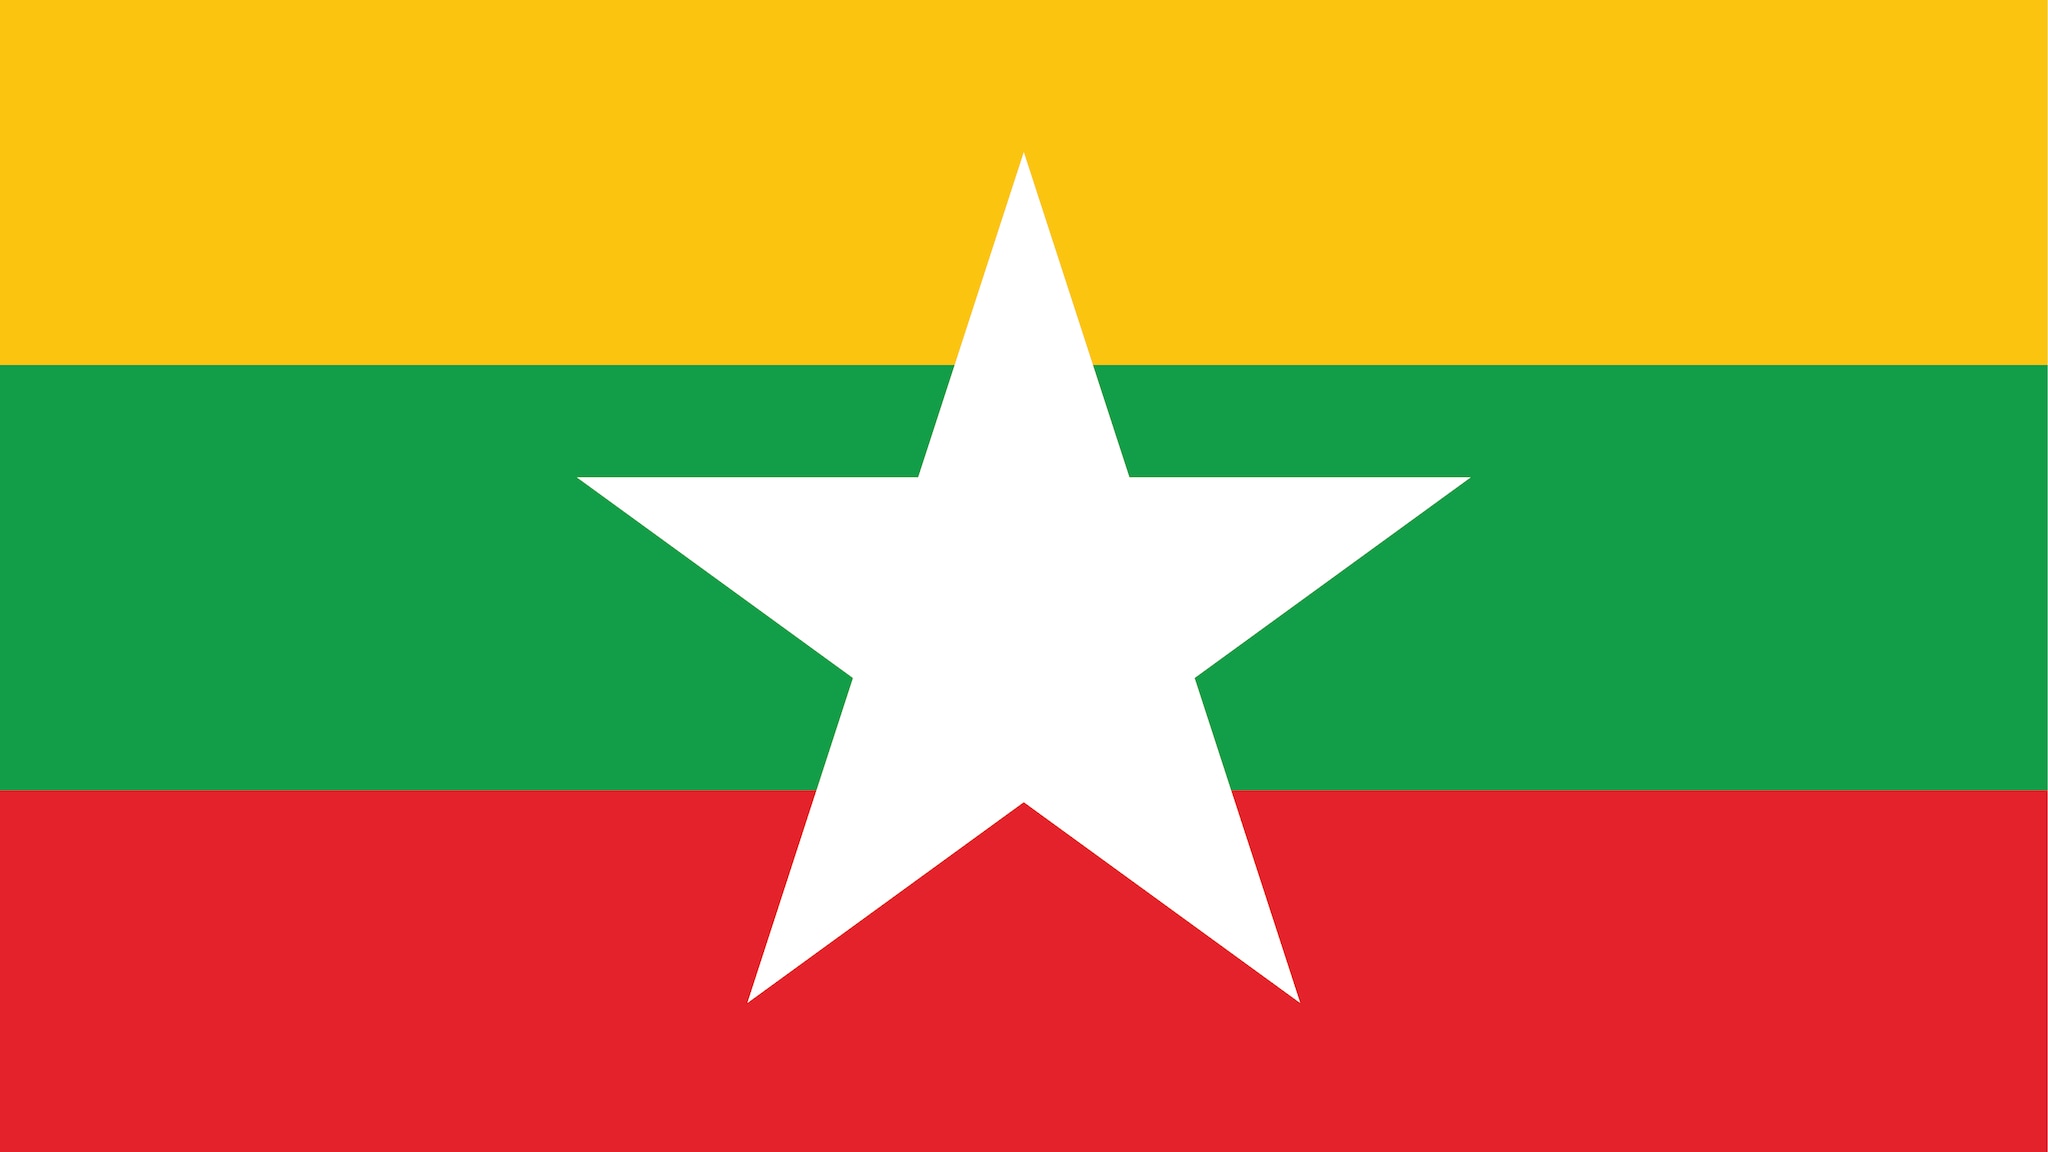 The flag of Burma consists of three horizontal stripes of yellow, green, and red from top to bottom. The yellow stripe is the top one, the green stripe is in the middle, and the red stripe is at the bottom.